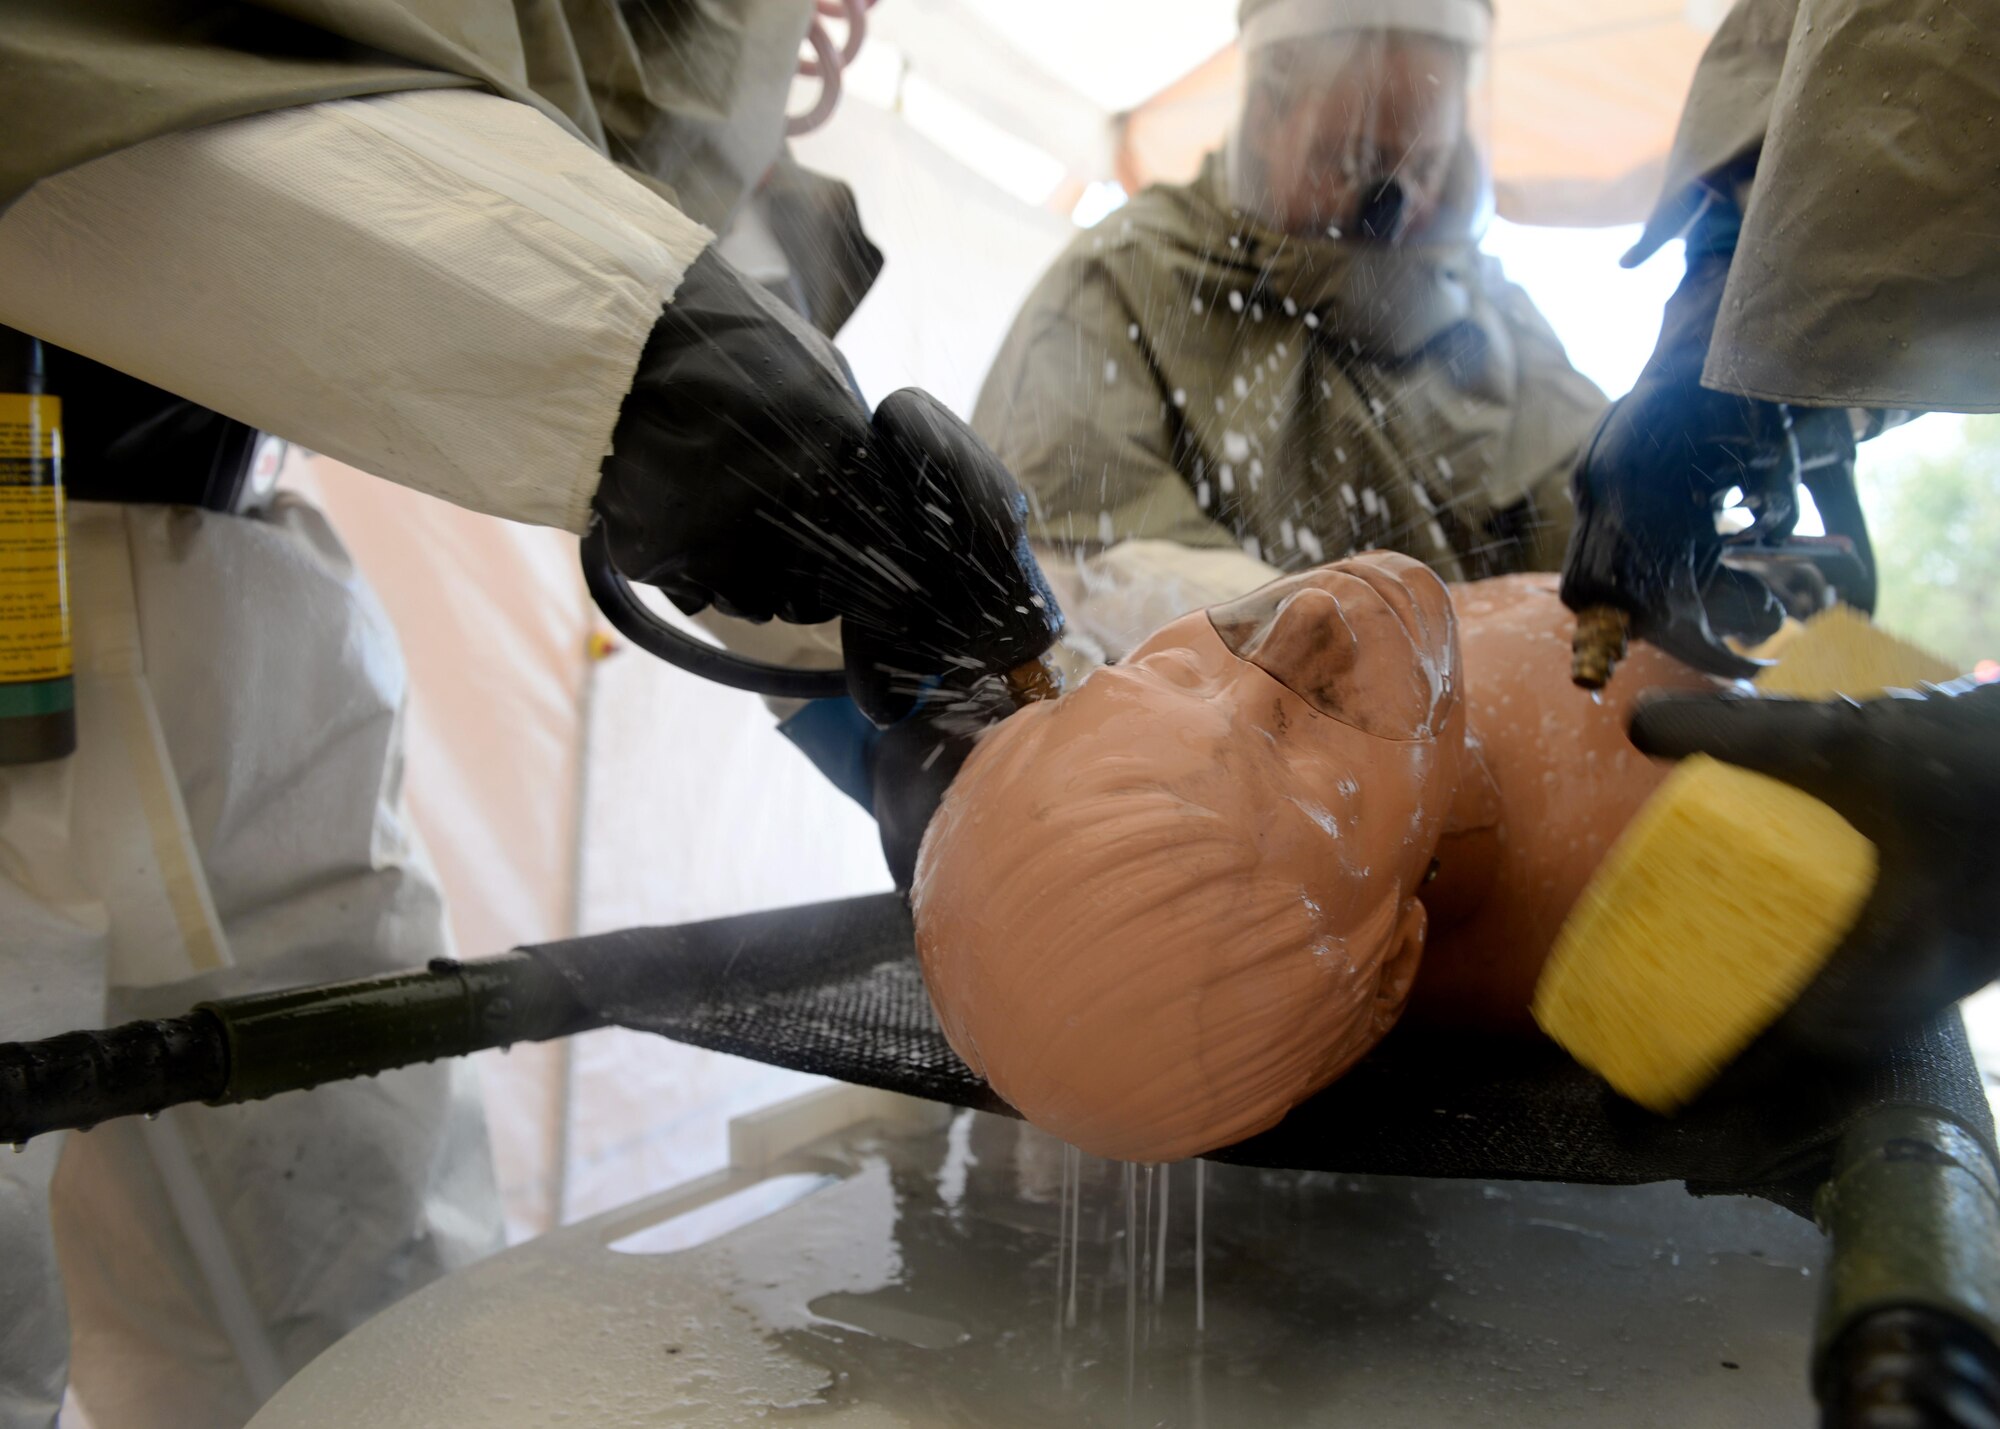 U.S. Air Force Staff Sgt. William Burnett Jr., 97 Medical Operations Squadron bioenvironmental engineer, instructs Airmen on Sept 21, 2016, Altus Air Force Base, Okla. This joint training prepared medical specialists from both Altus AFB and Sheppard AFB to help keep the medical centers clear of potential contaminate in the case of a chemical outbreak. (U.S. Air Force Photo by Airman Jackson N. Haddon/Released).